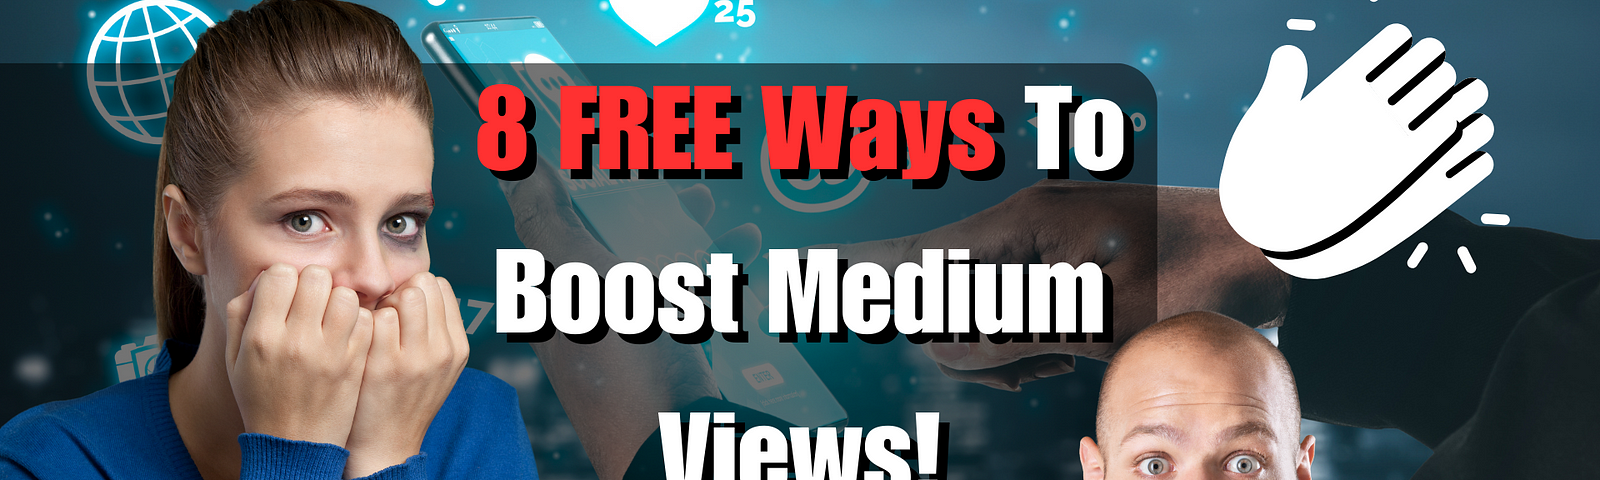 Discover The Best 8 Free Ways To Increase Your Medium Views Astronomically